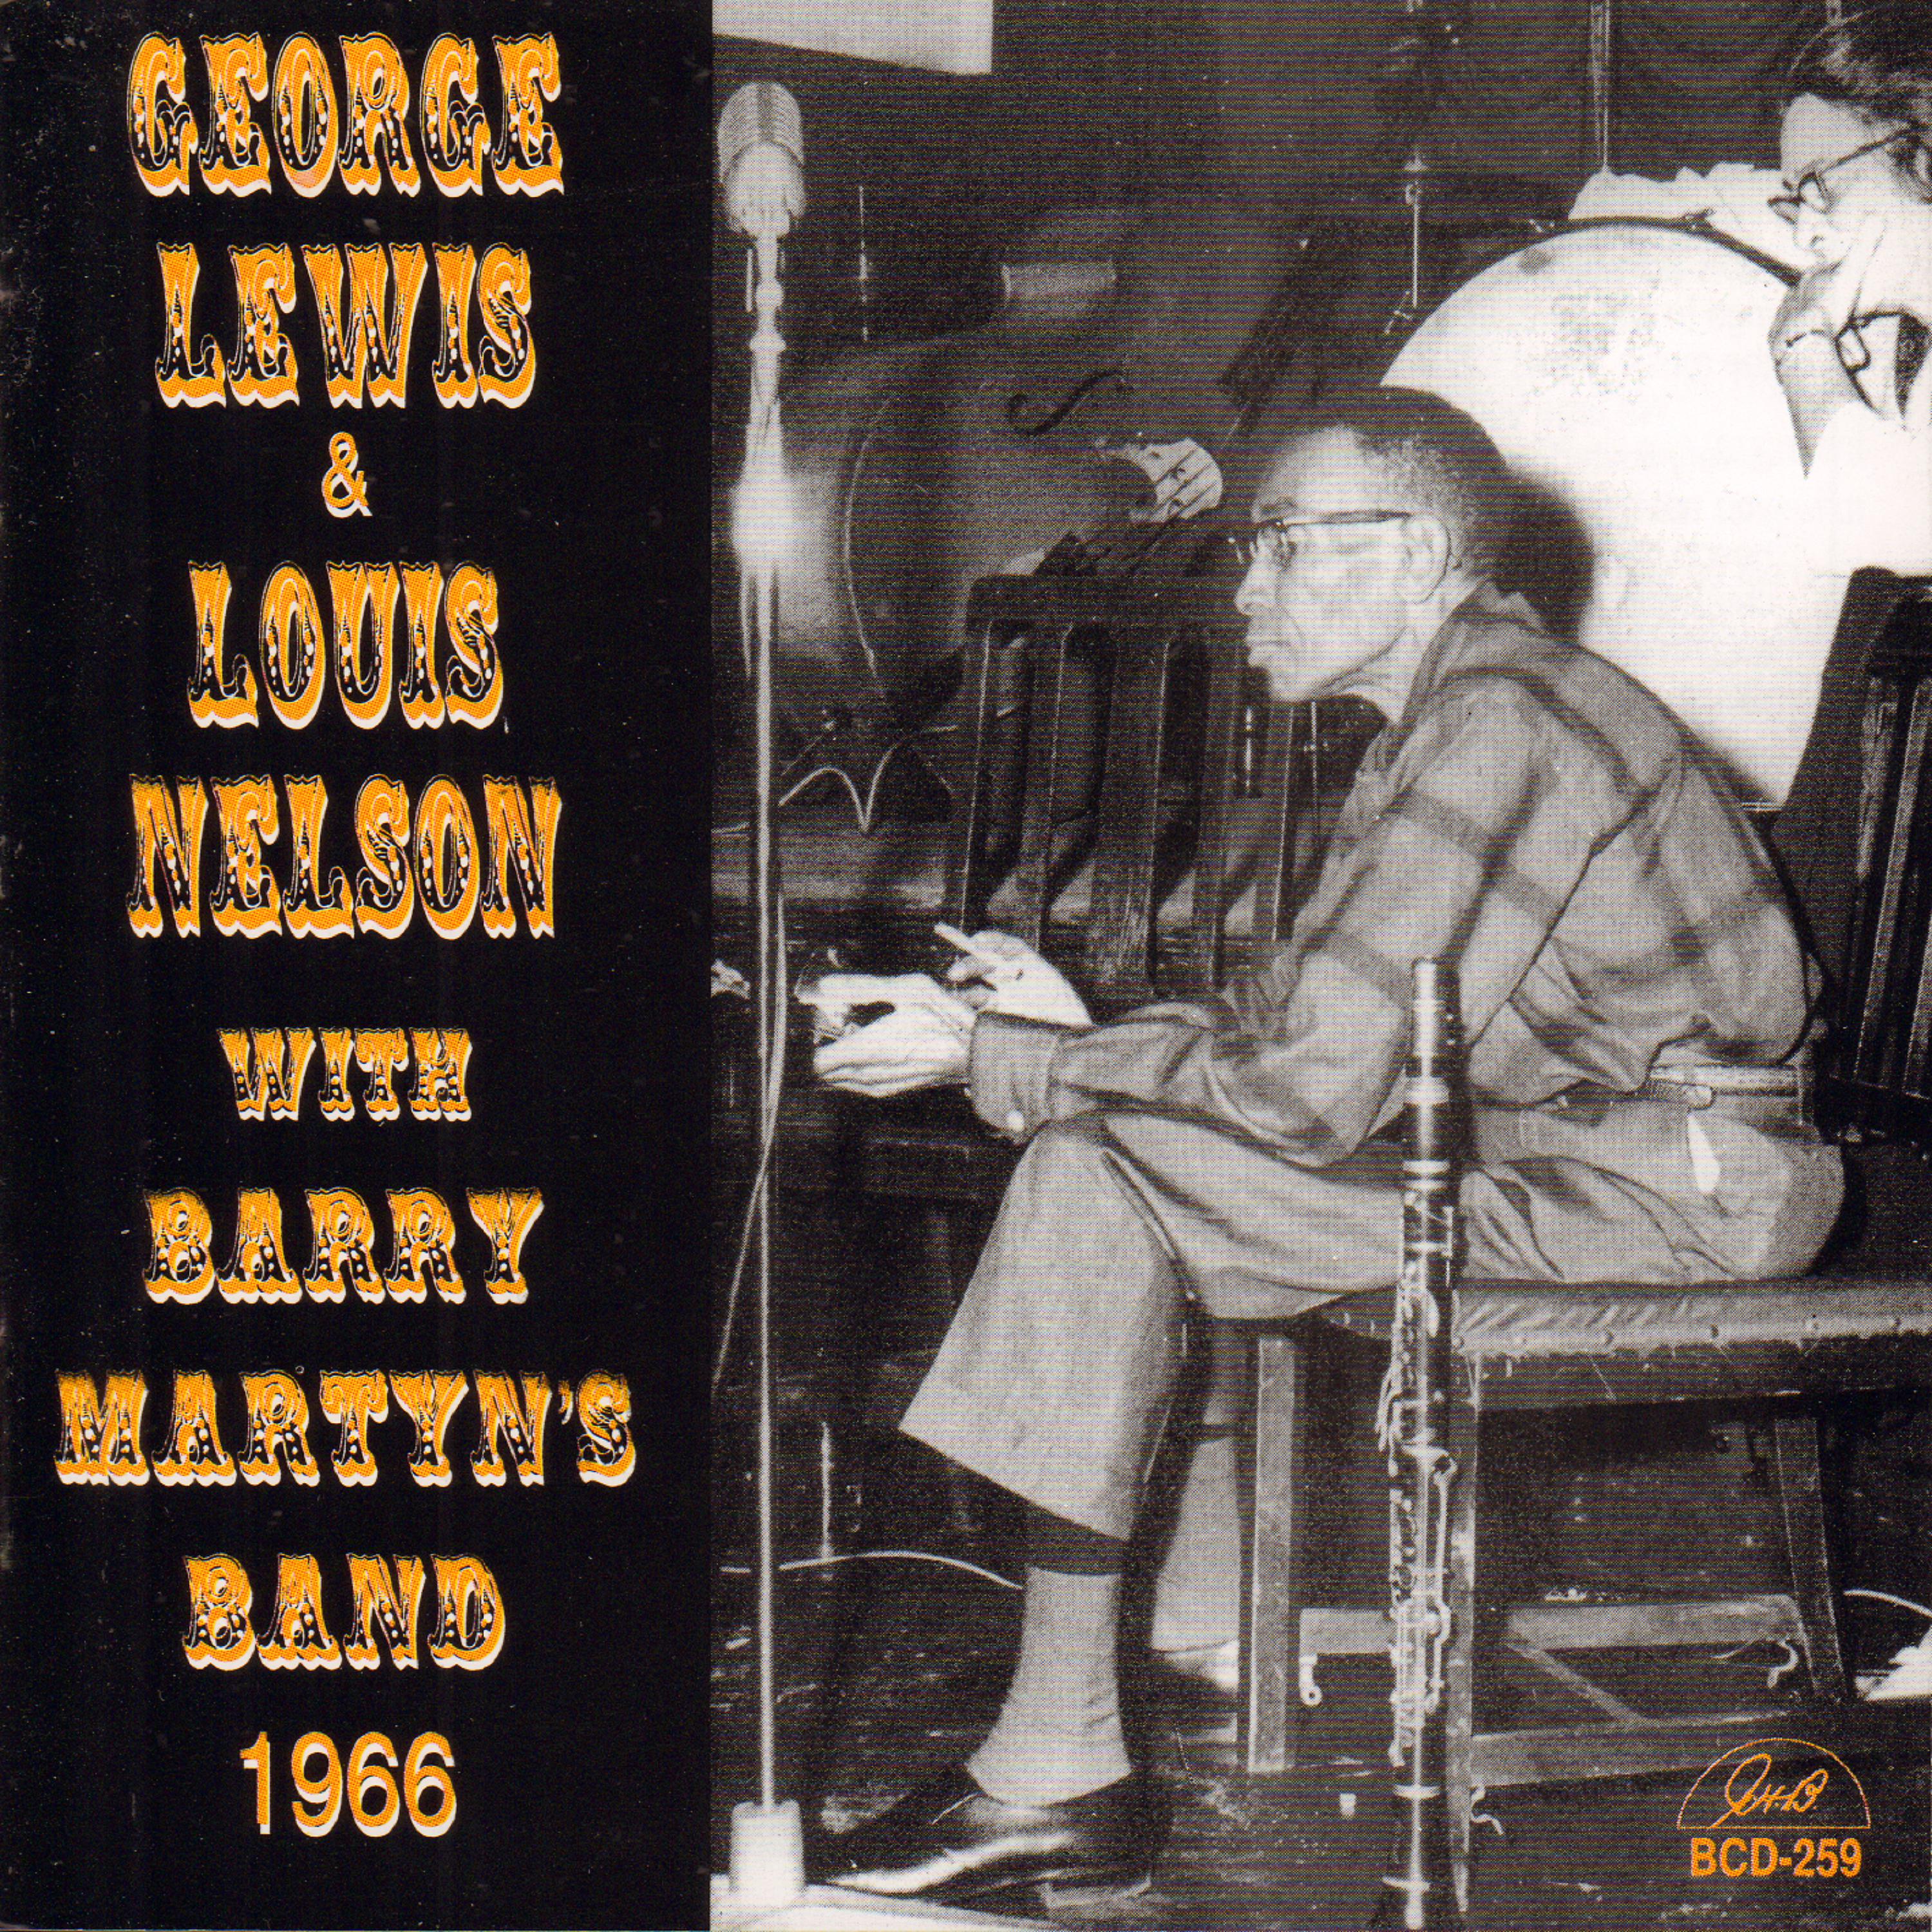 Постер альбома George Lewis and Louis Nelson with Barry Martyn's Band 1966